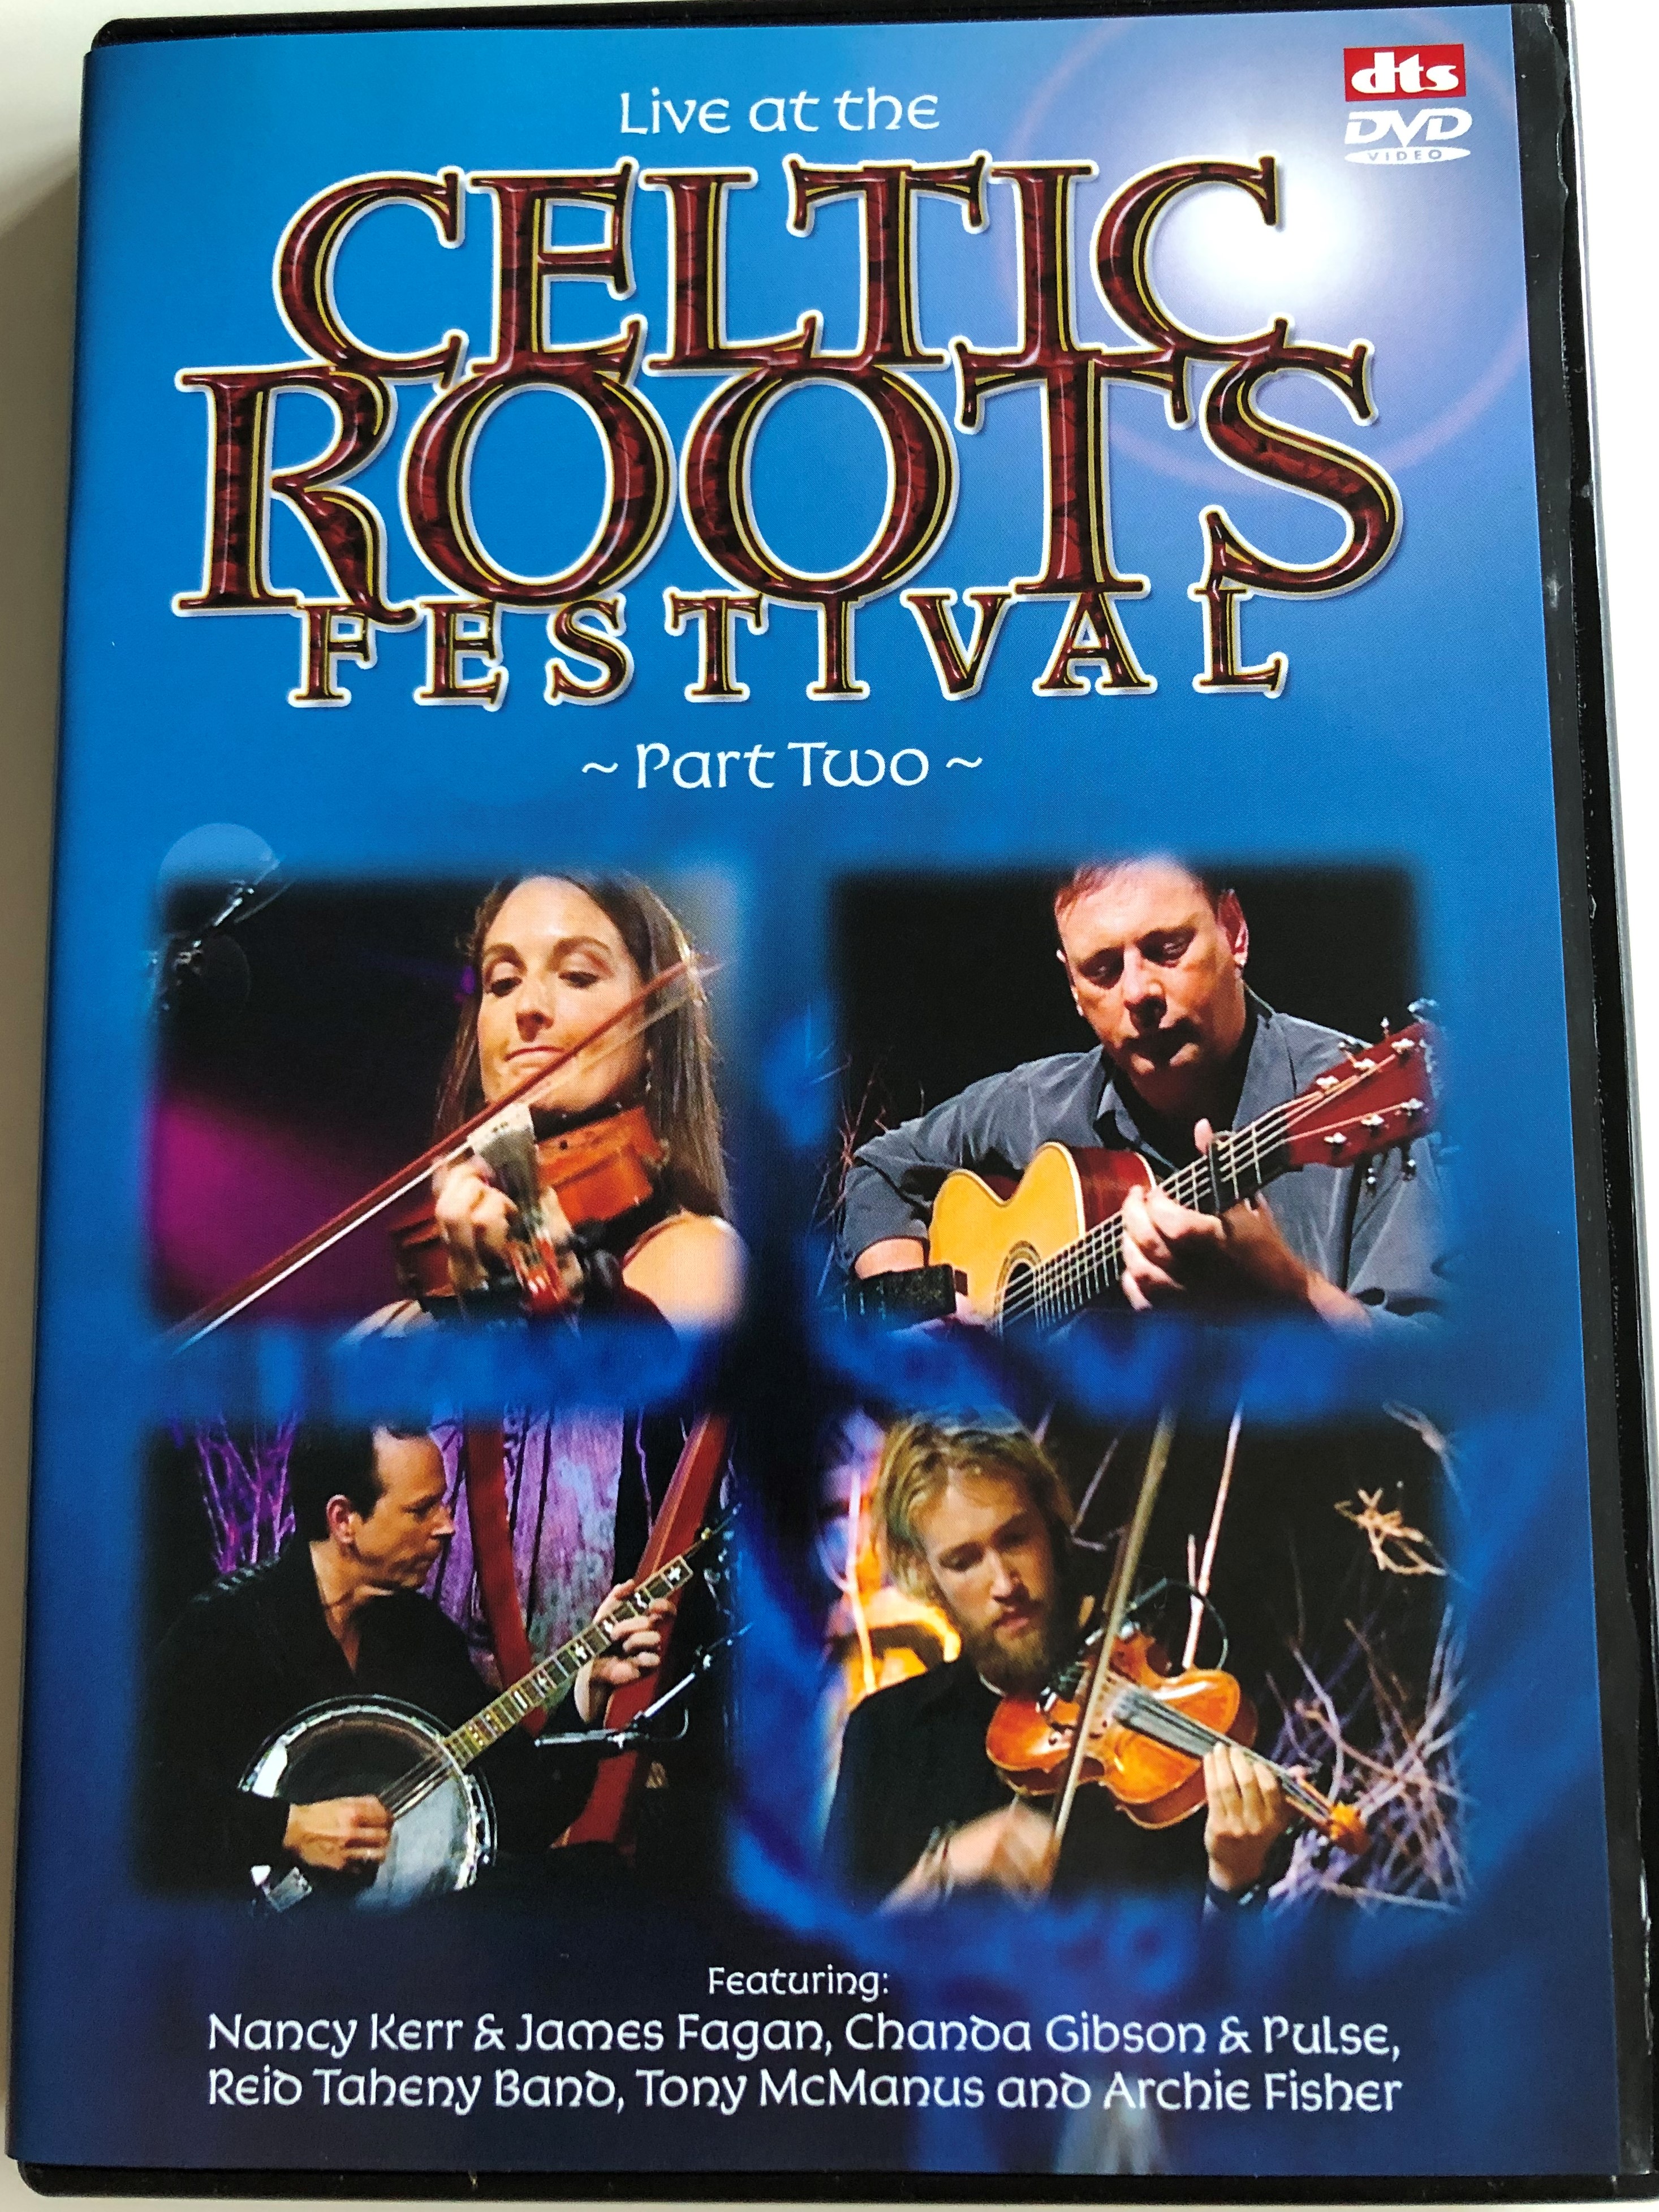 live-at-the-celtic-roots-festival-part-two-dvd-2006-featuring-nancy-kerr-james-fagan-chanda-gibson-pulse-reid-taheny-band-tony-macmanus-and-archie-fisher-.jpg